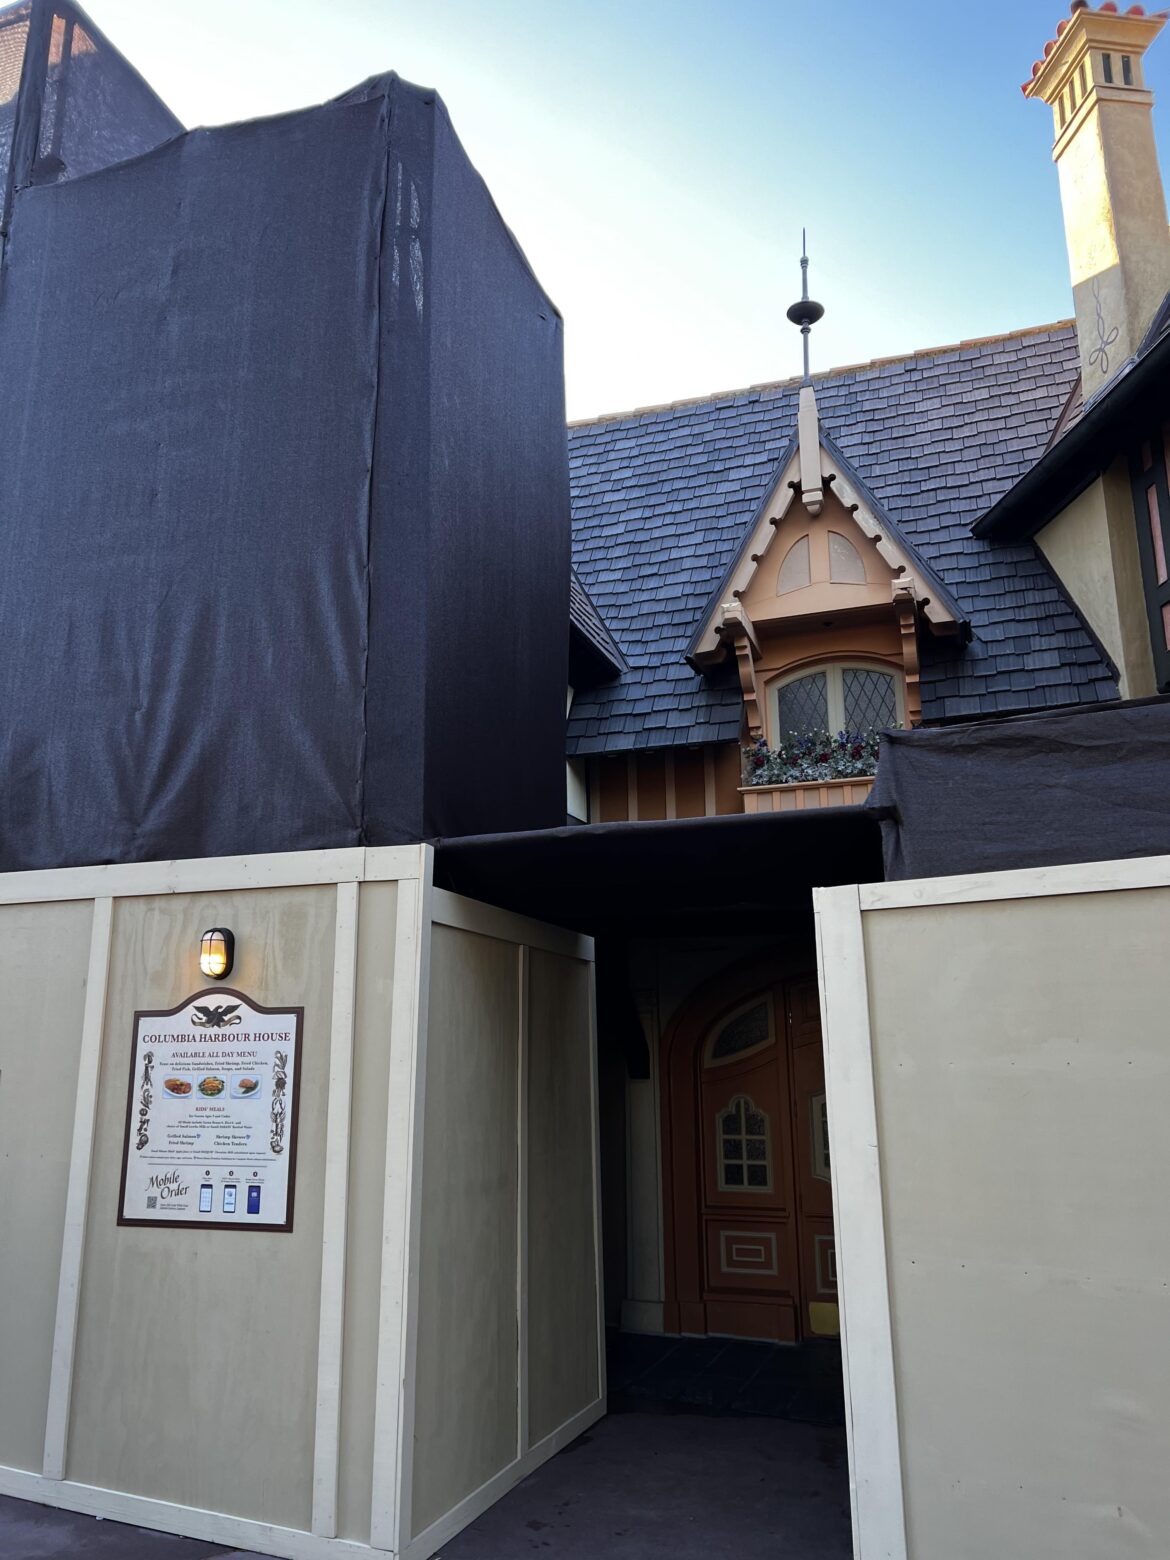 Columbia Harbour House Still Behind Scrim as Refurbishment Continues